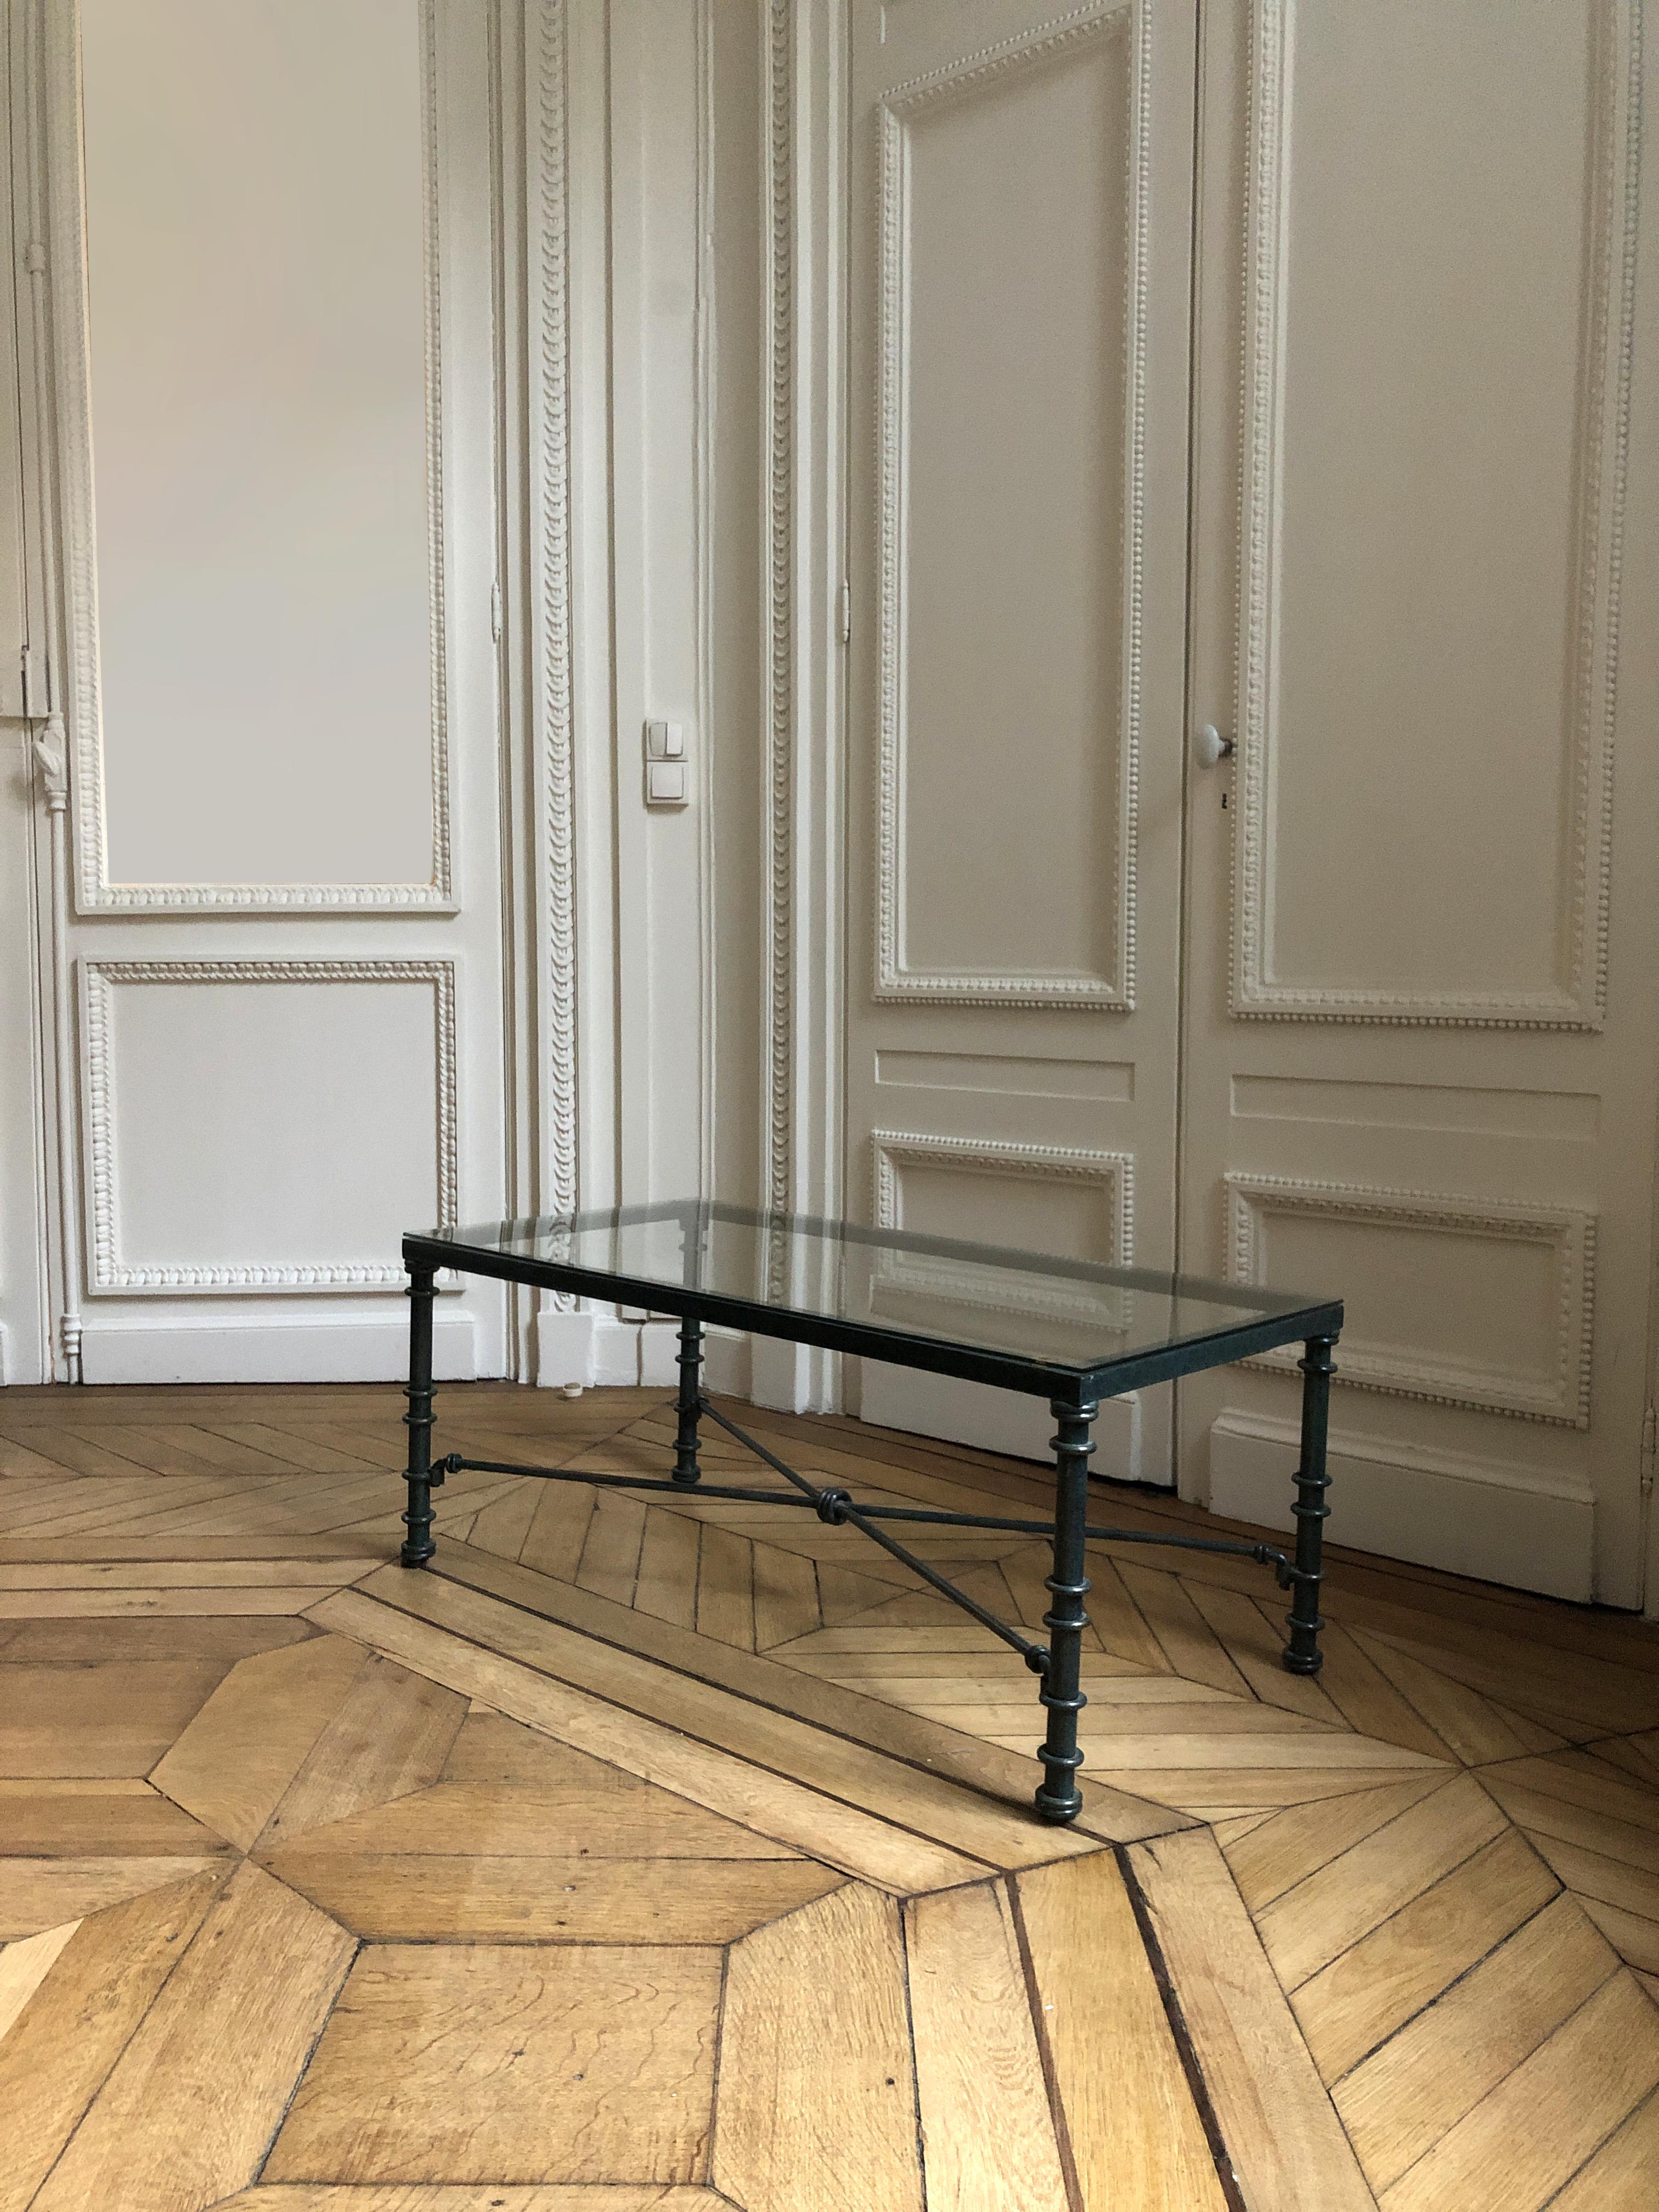 Nice coffee table with a glass top resting on a wrought iron base. The base has a dark green-grey patina. It has ringed uprights joined by an X-shaped spacer. The glass top is hold with suction cups. 
It is a bit hard to date this around 1950 in